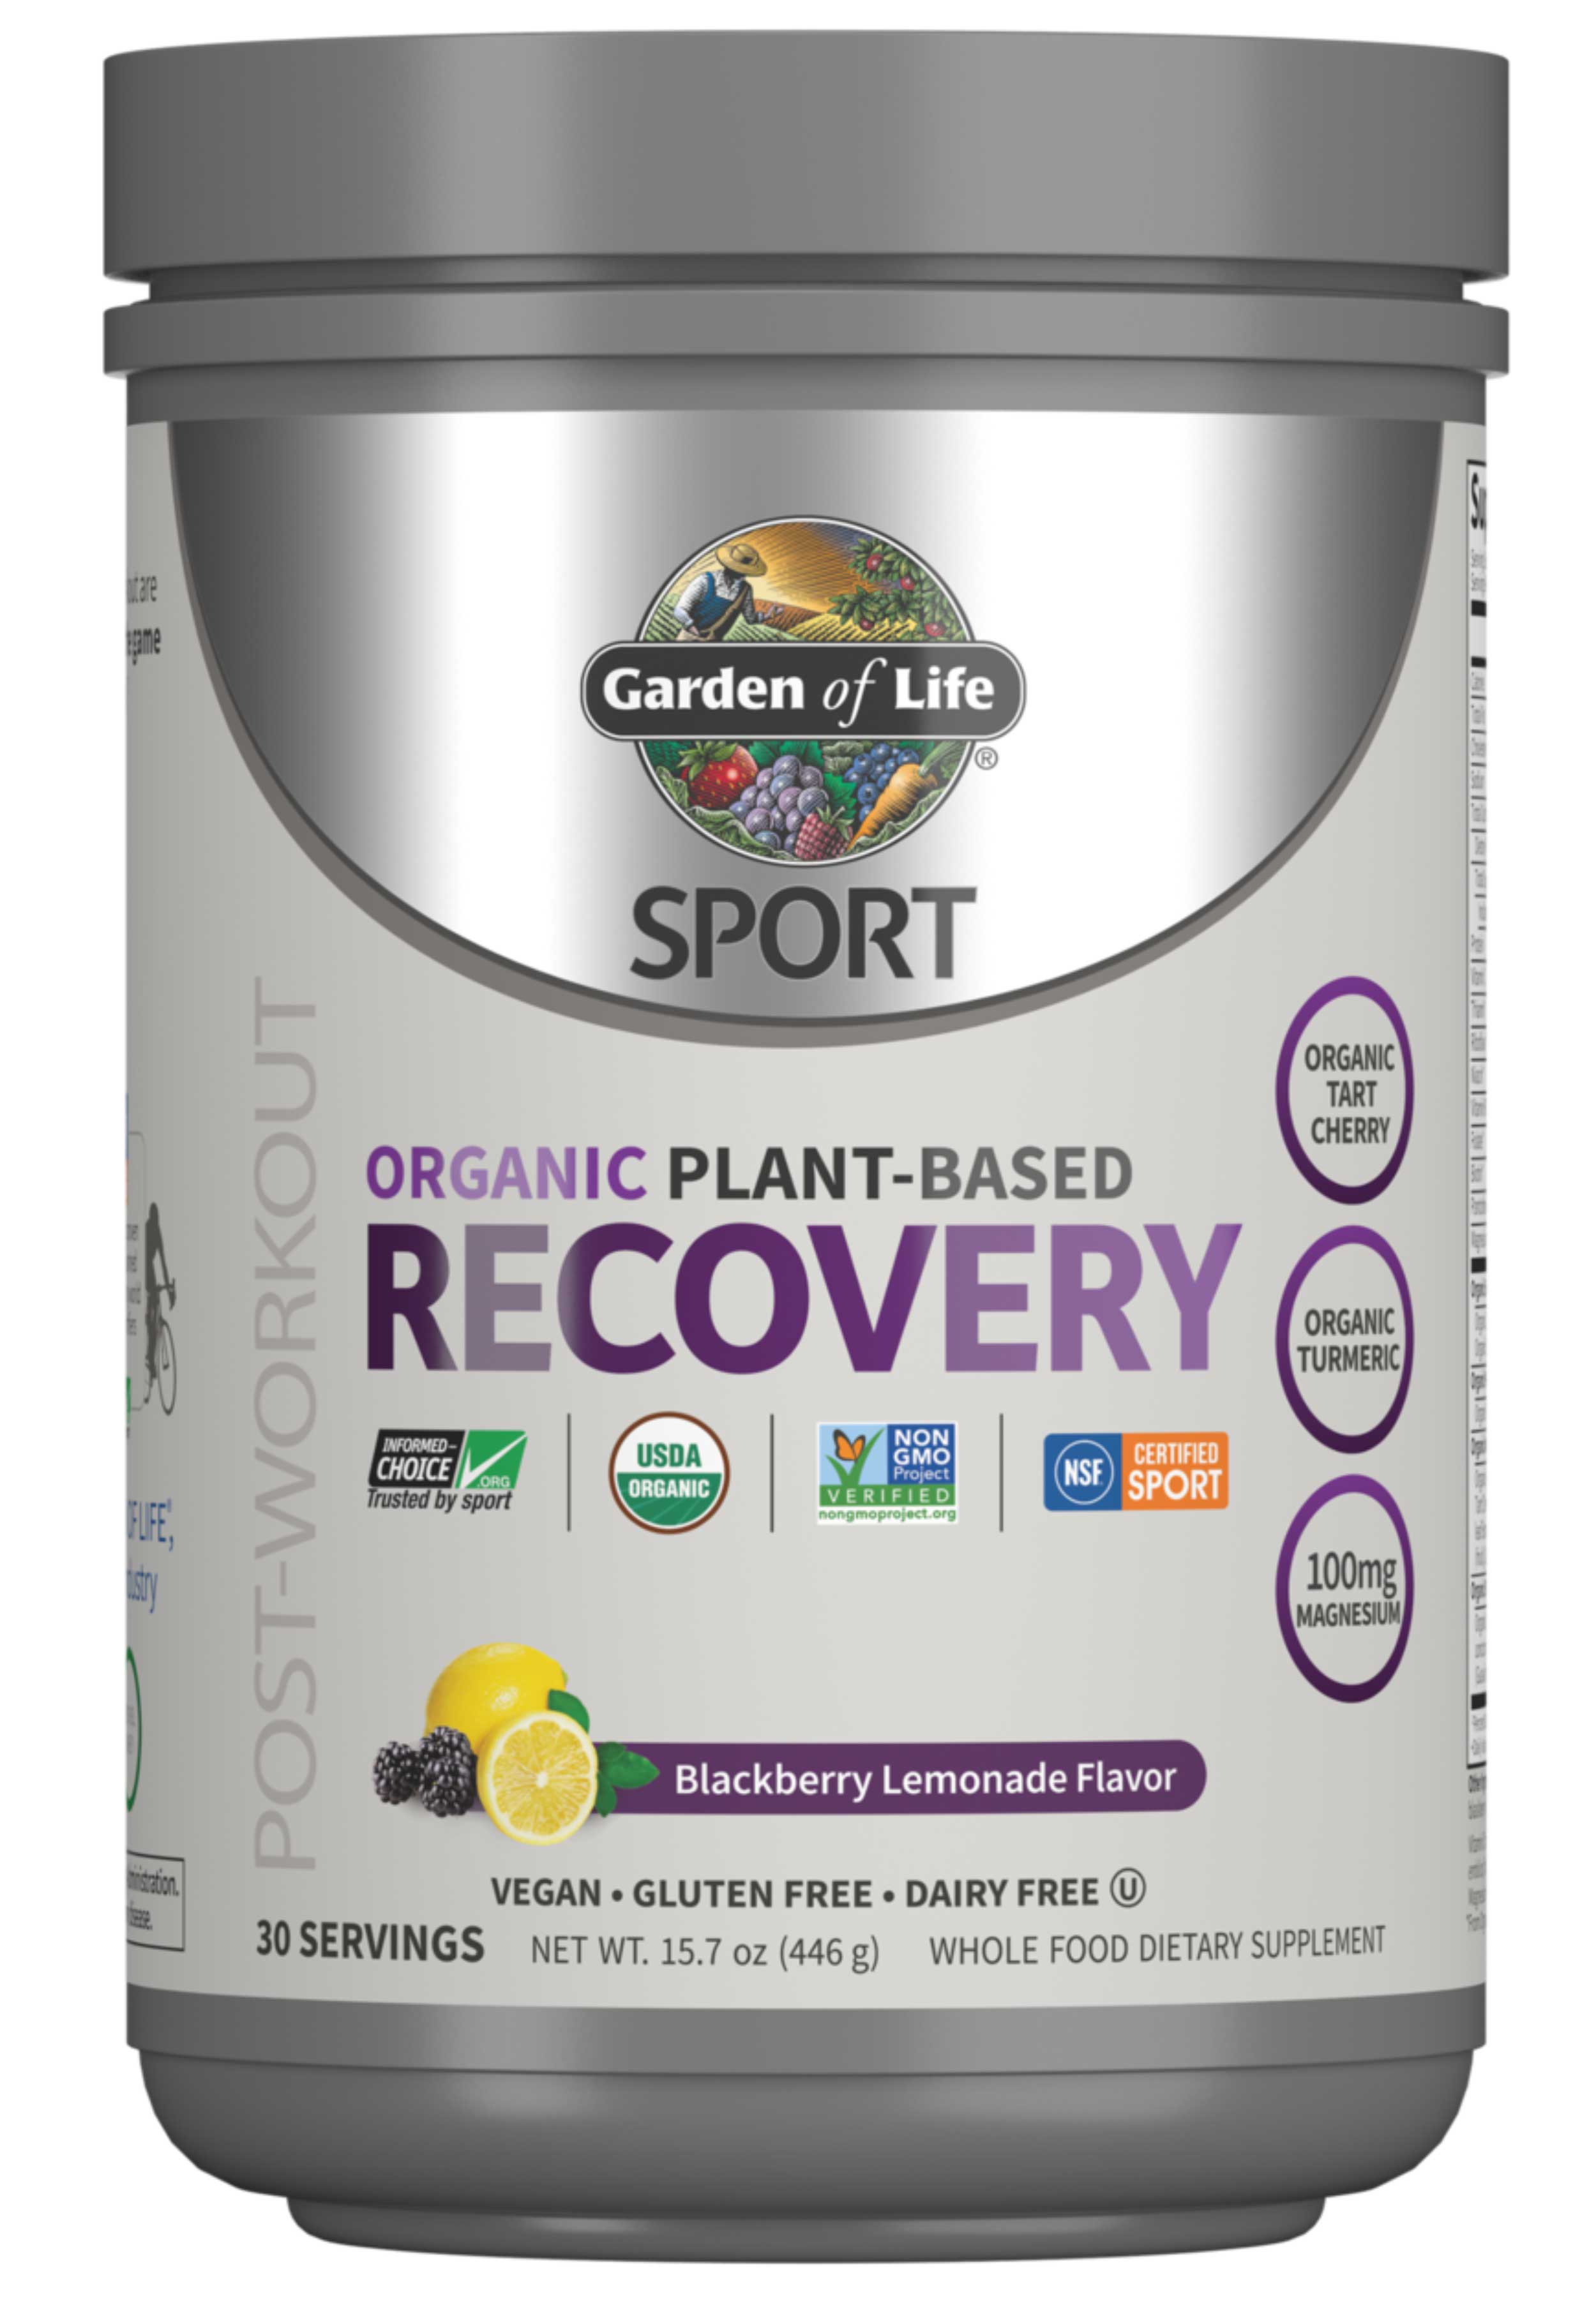 Garden of Life SPORT Organic Plant-Based Recovery